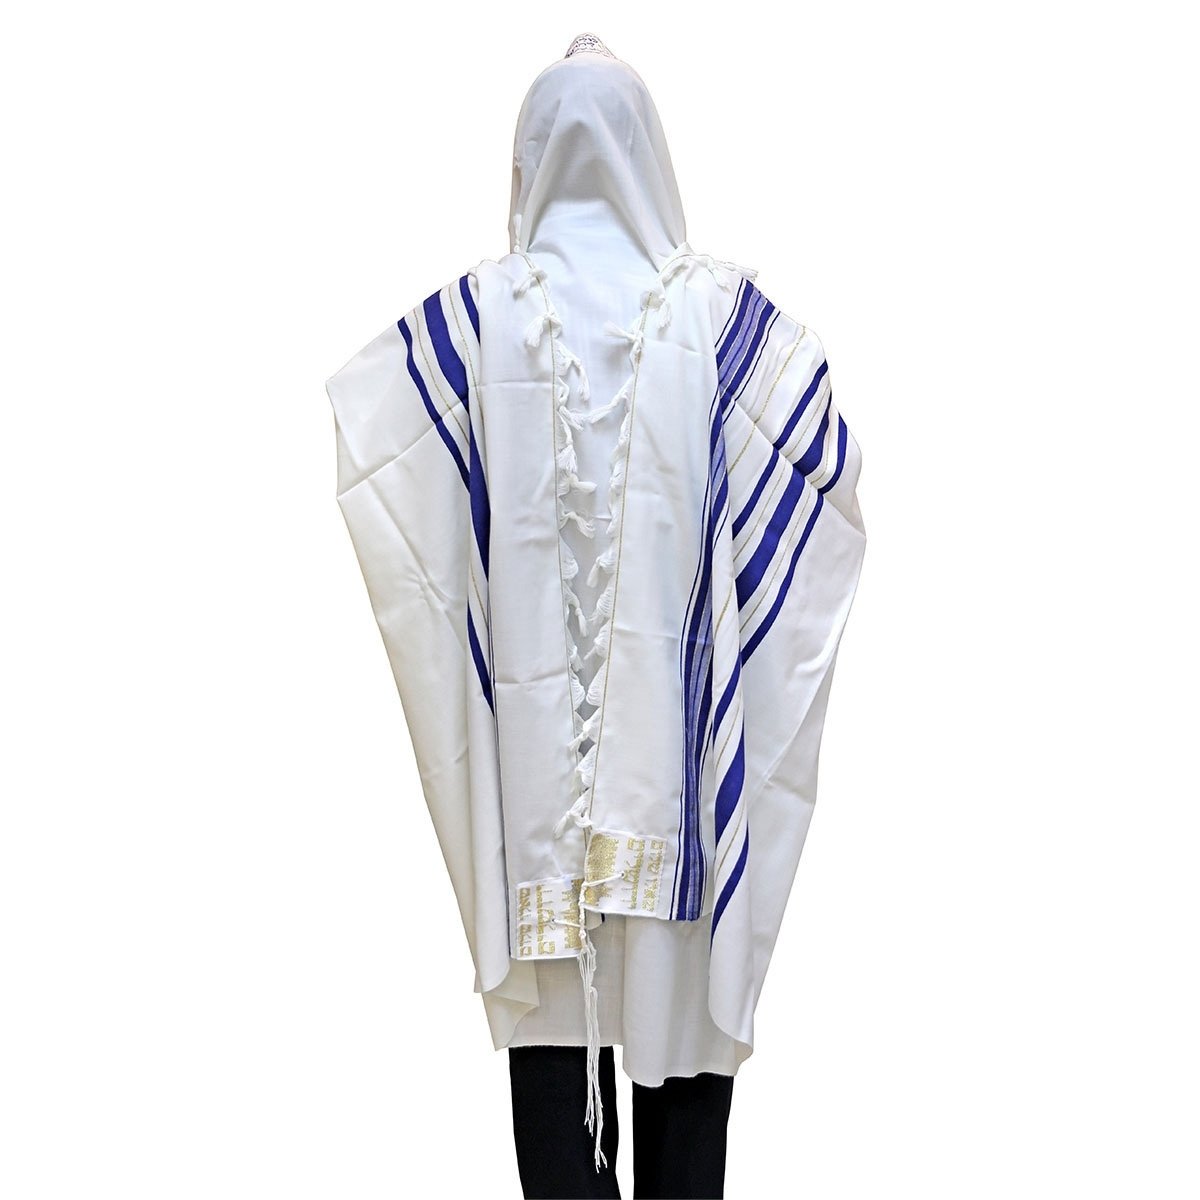 Tefillin for Bar Mitzvah Big Simple Tefillin Are Made of Many Pieces of  Sheepskin That Are Stuck Together,their Halakha Level is Very Low. -   Denmark